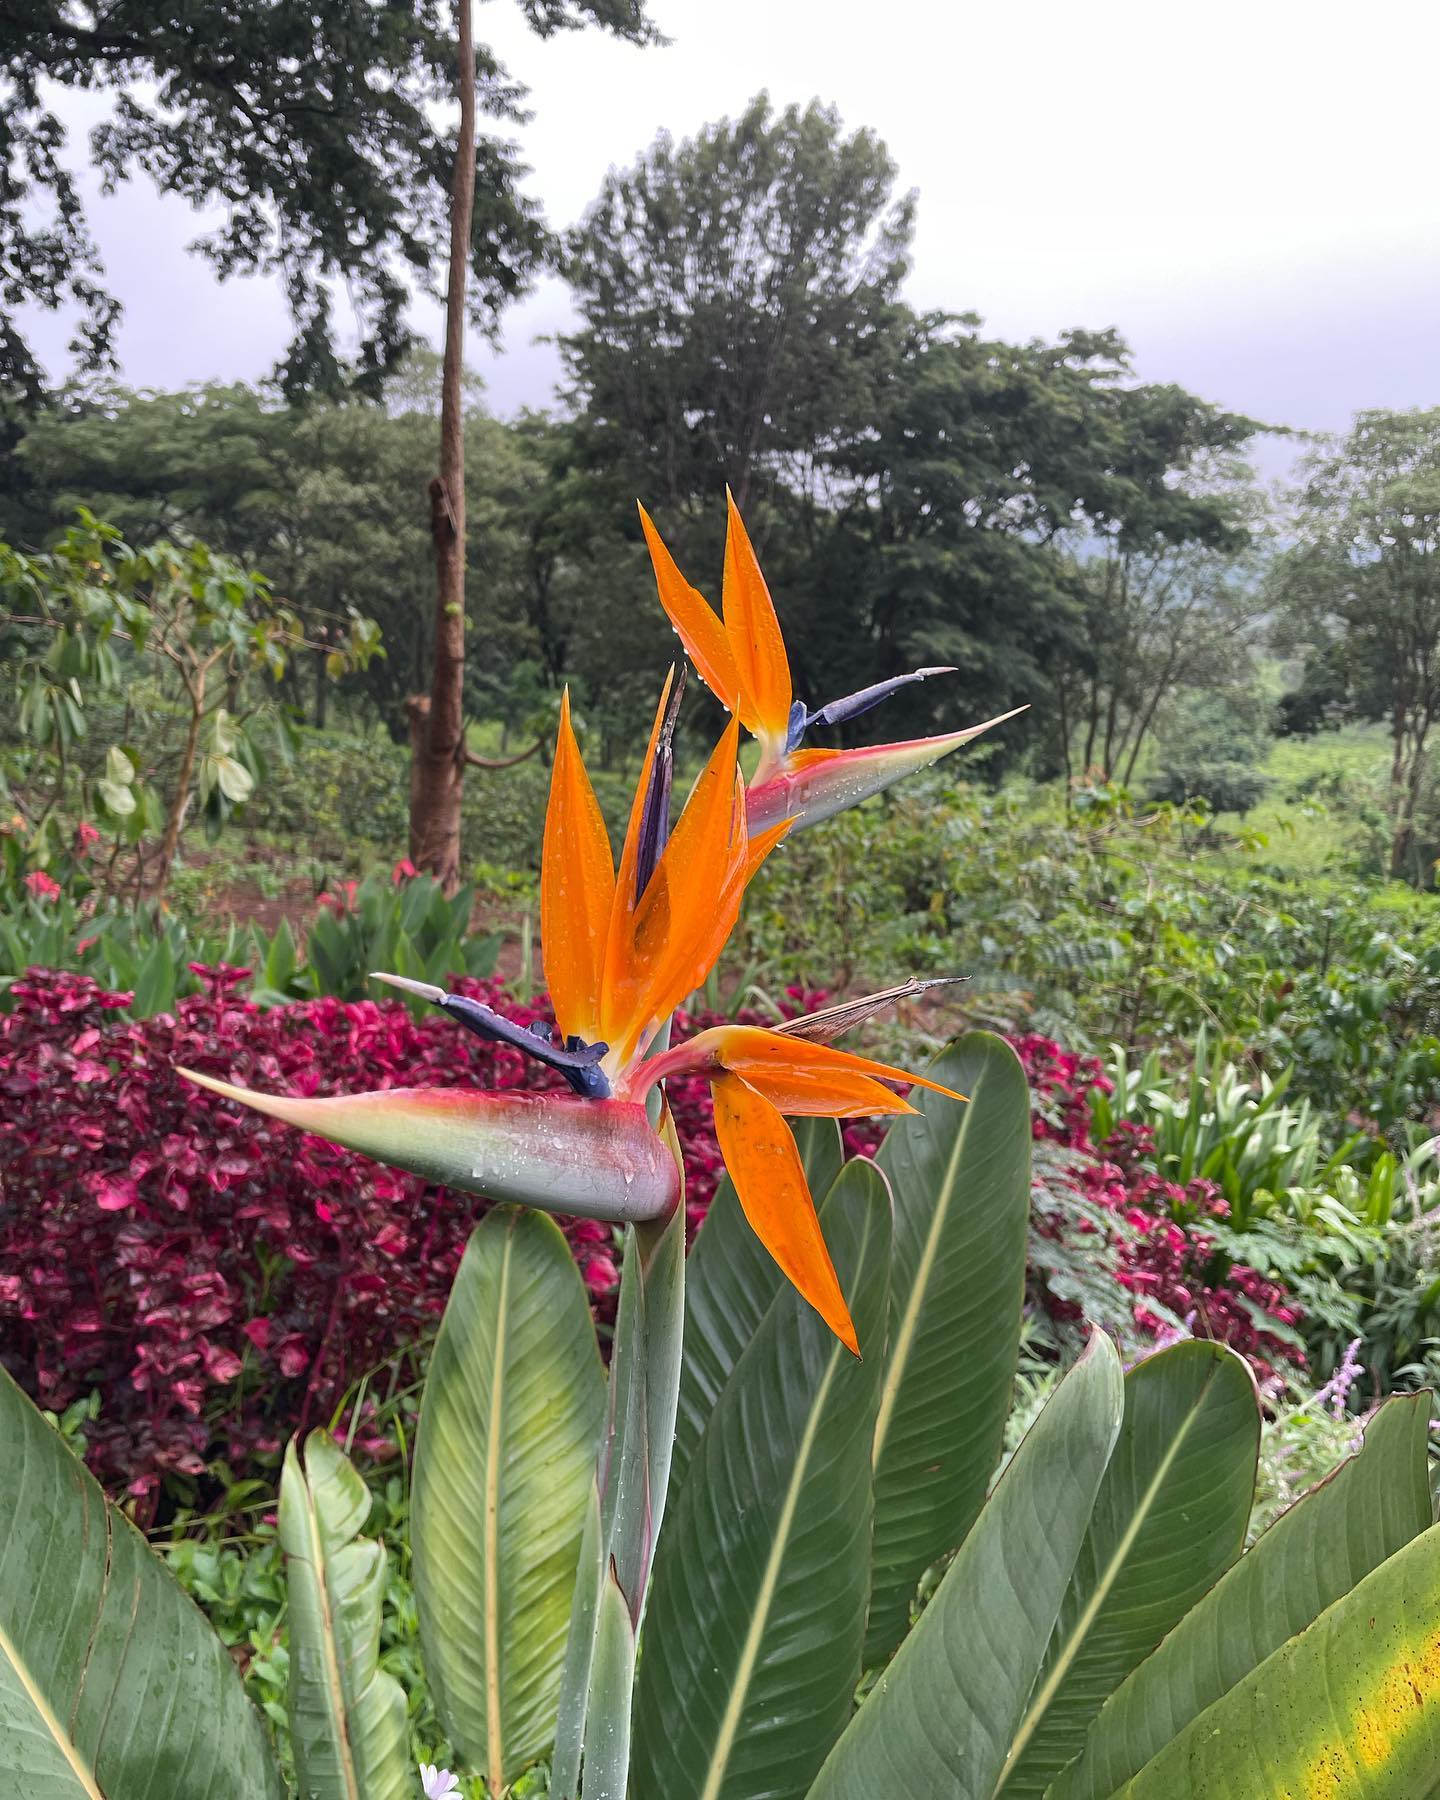 The masika or big rains have started. Our garden and farm are loving it! The temperature has dropped a little and the lunches are slightly longer….. #rainy #rainyseason #rainydays #birdofparadise #flora #flowers #garden #farm #gardener #heliconia #rains